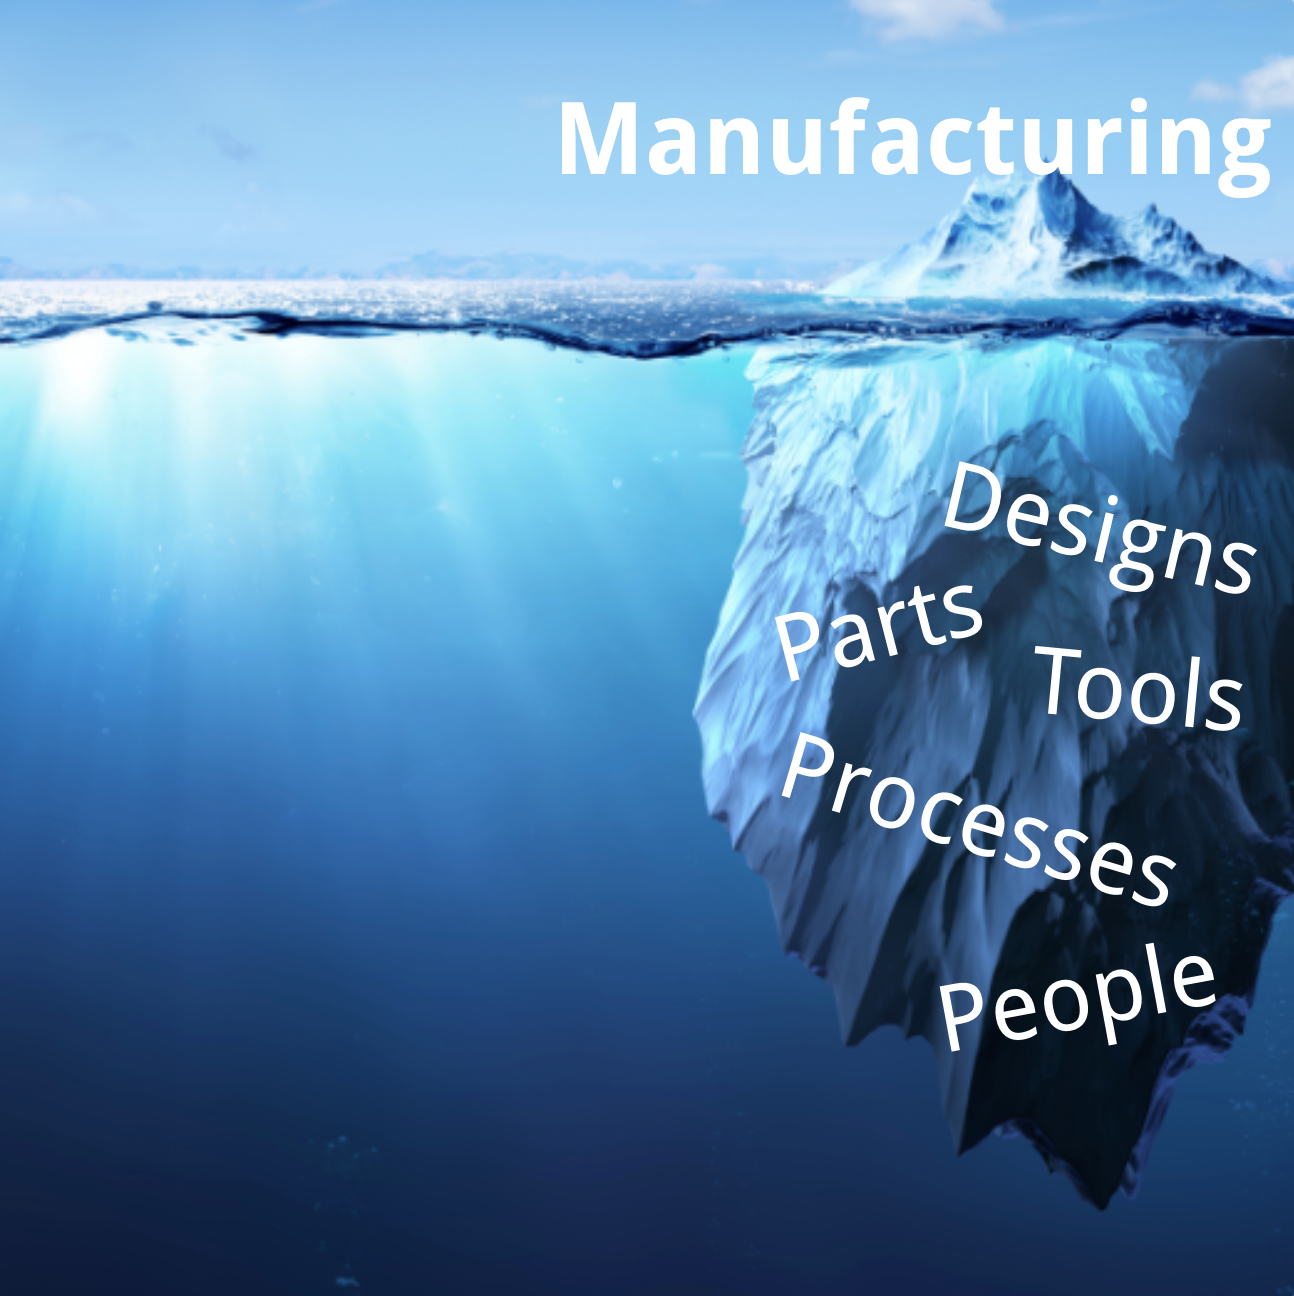 An image comparing the complexity of manufacturing to an iceberg, where you can only see a small portion of the whole